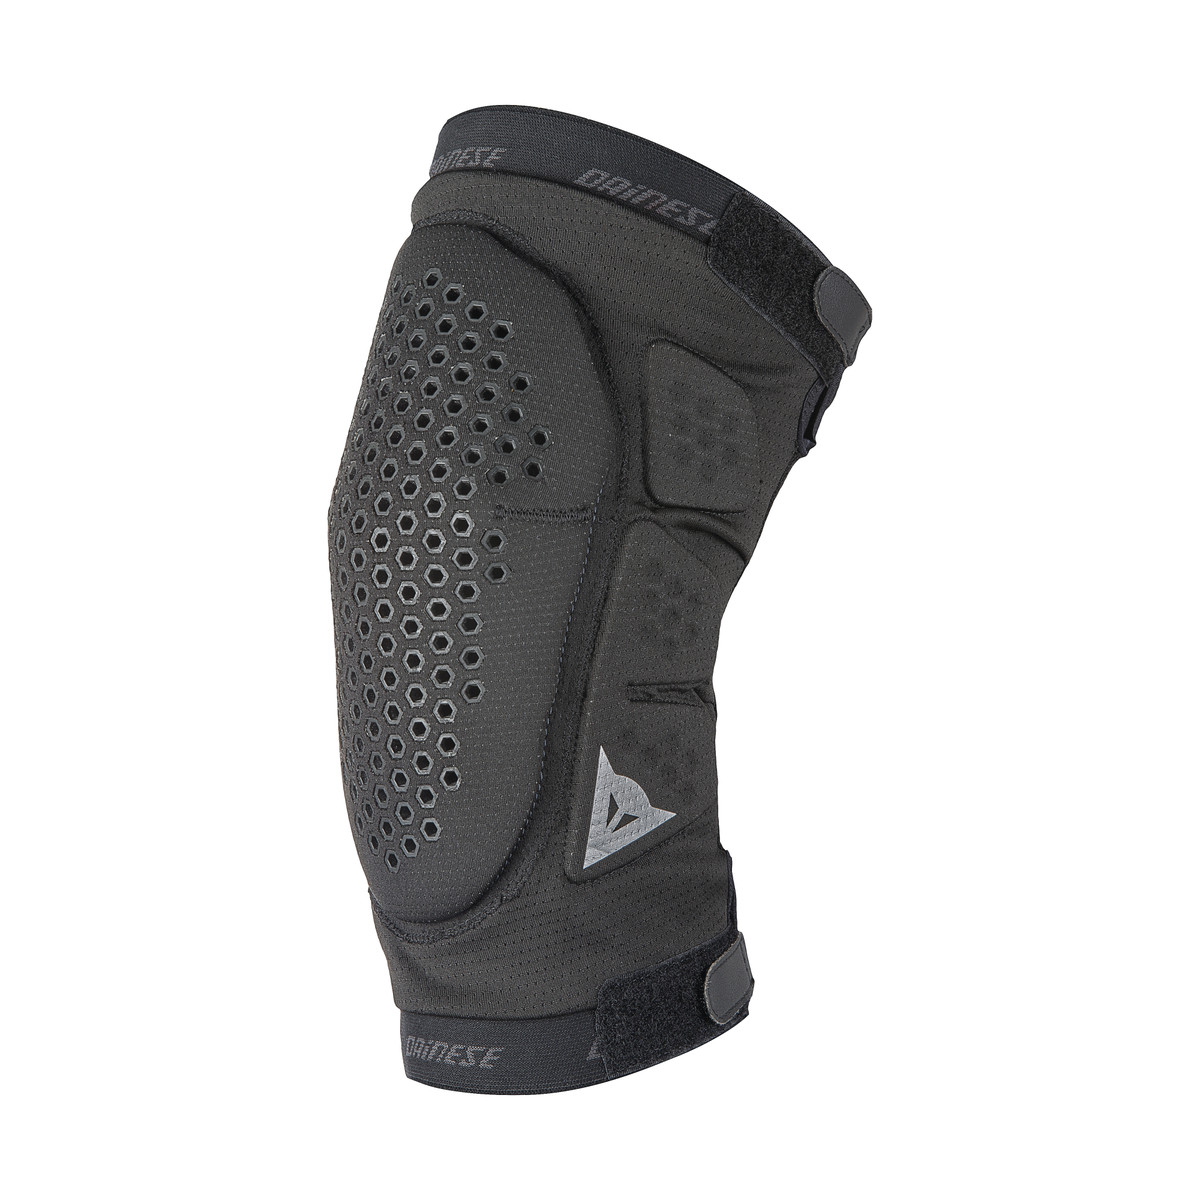 Dainese Trail Skins Knee Guard Size Chart